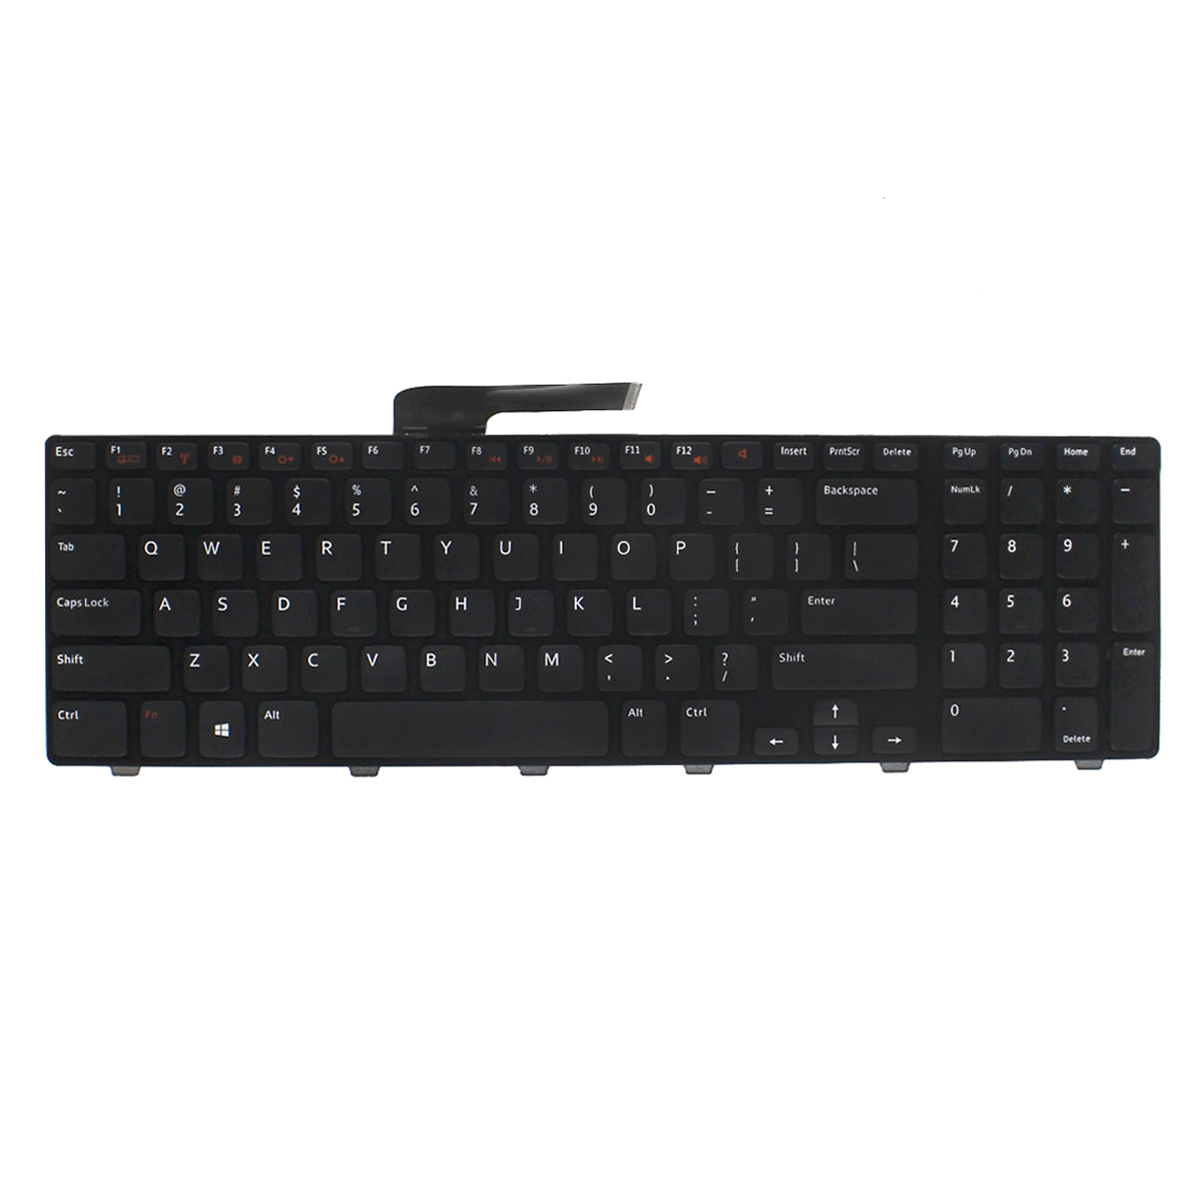 New original laptop keyboard for Dell Inspiron 17R N7110 5720 77